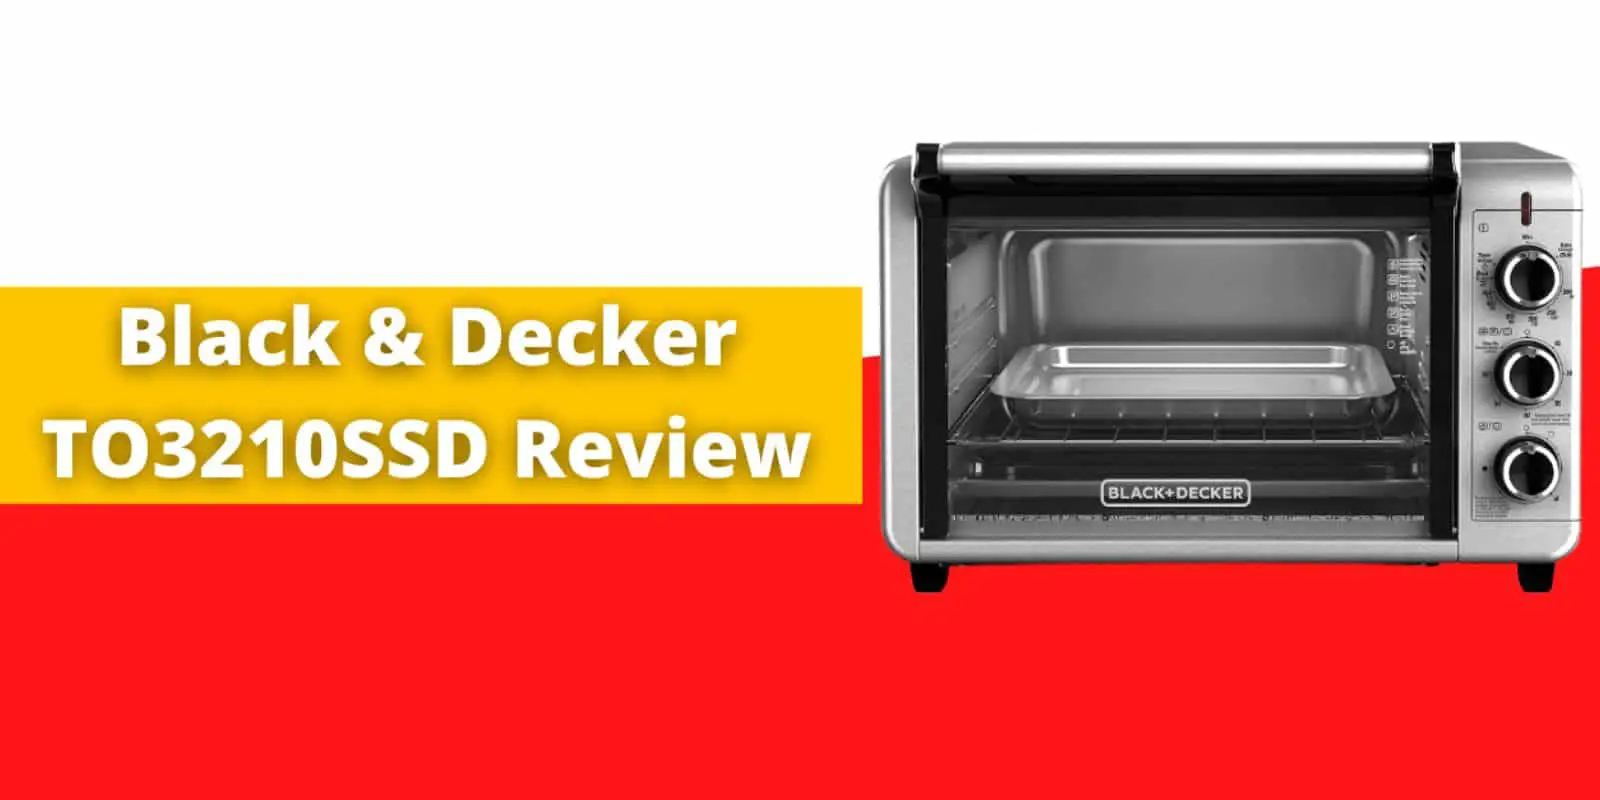 Black & Decker TO3210SSD Review: Specification, Pros & Cons